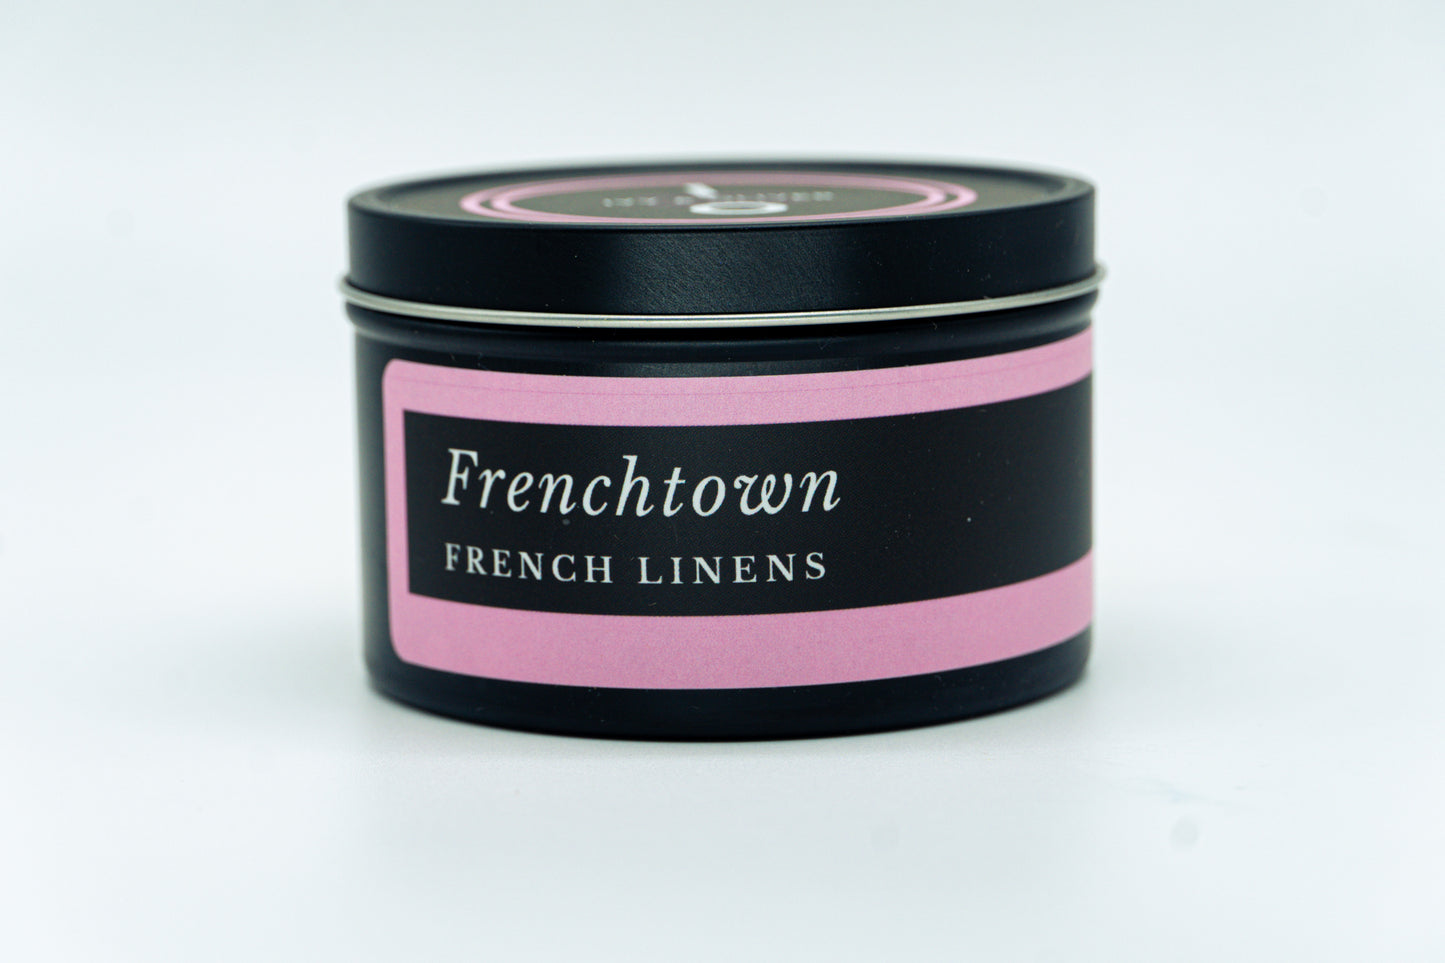 Frenchtown - French Linens - Wooden Wick Candle